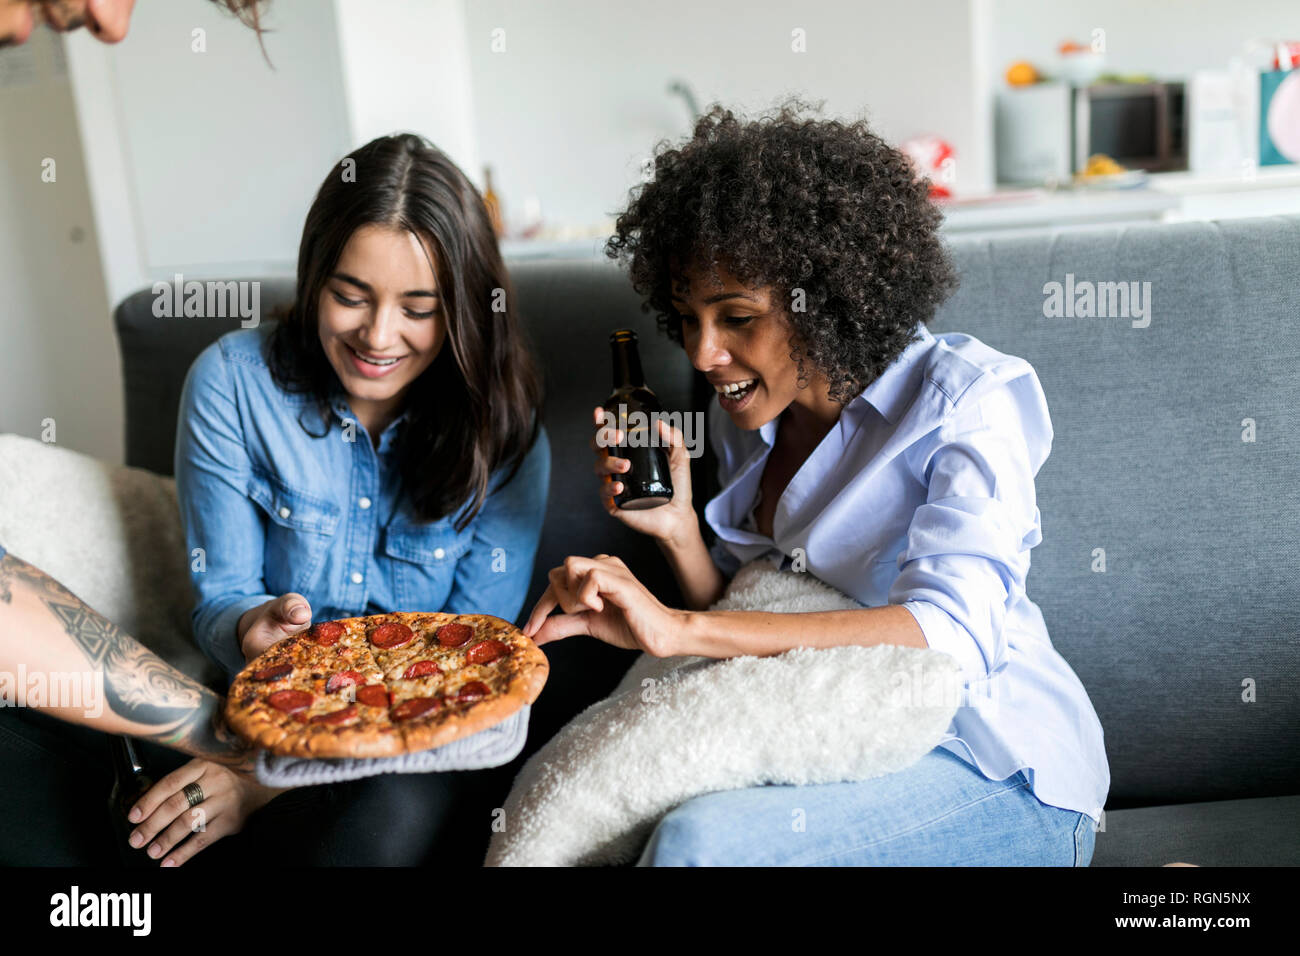 Tattooed man offering pizza to friends sitting on couch Stock Photo